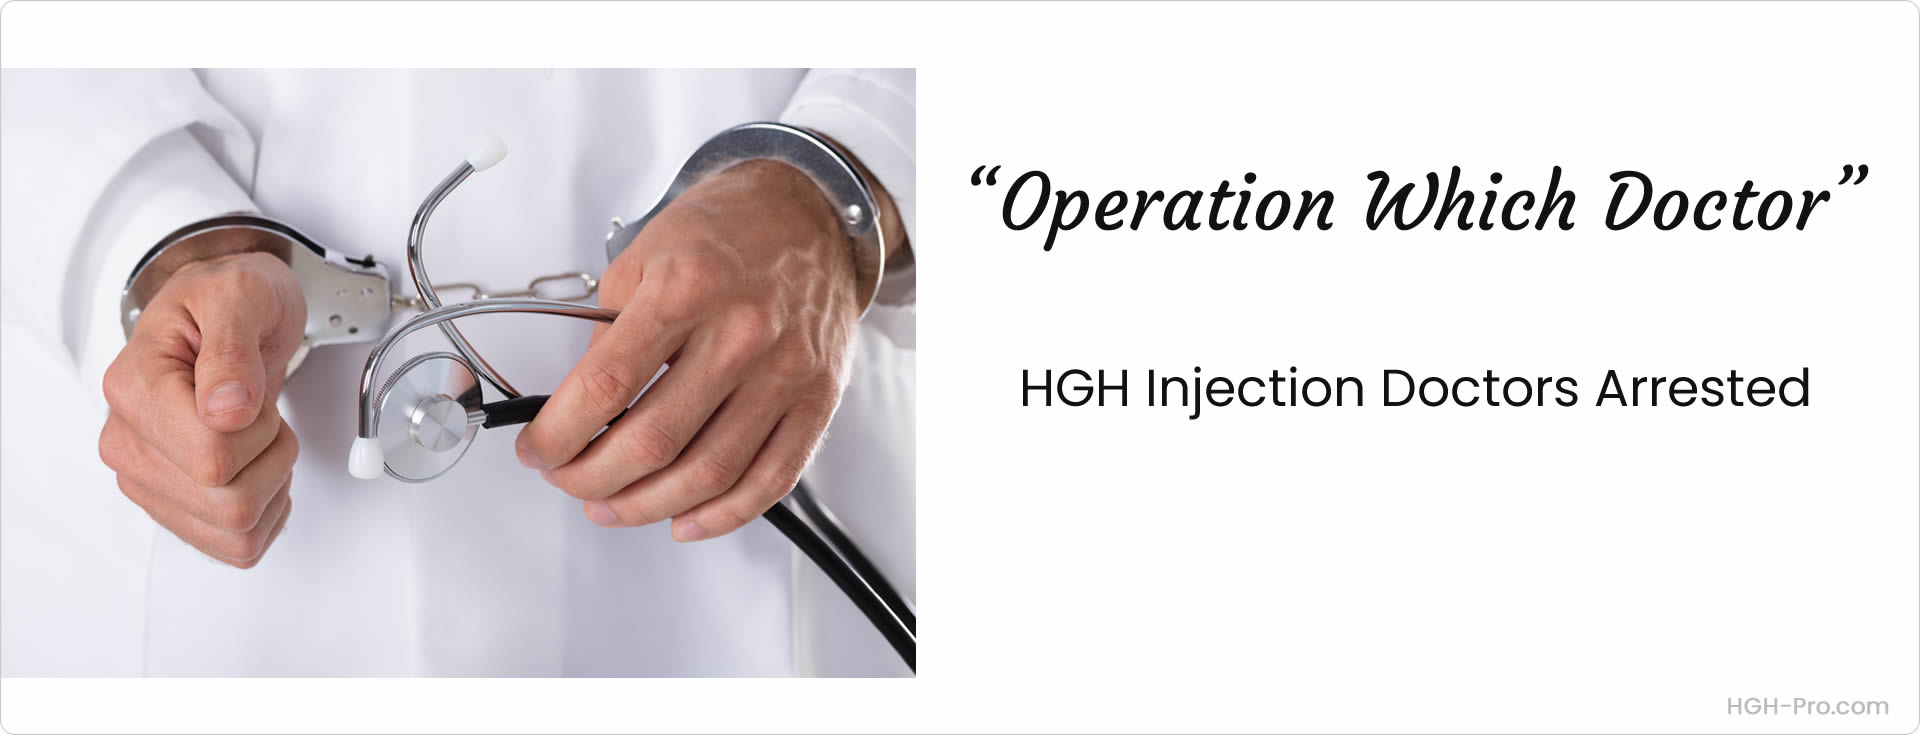 HGH injection doctors arrested for prescribing online